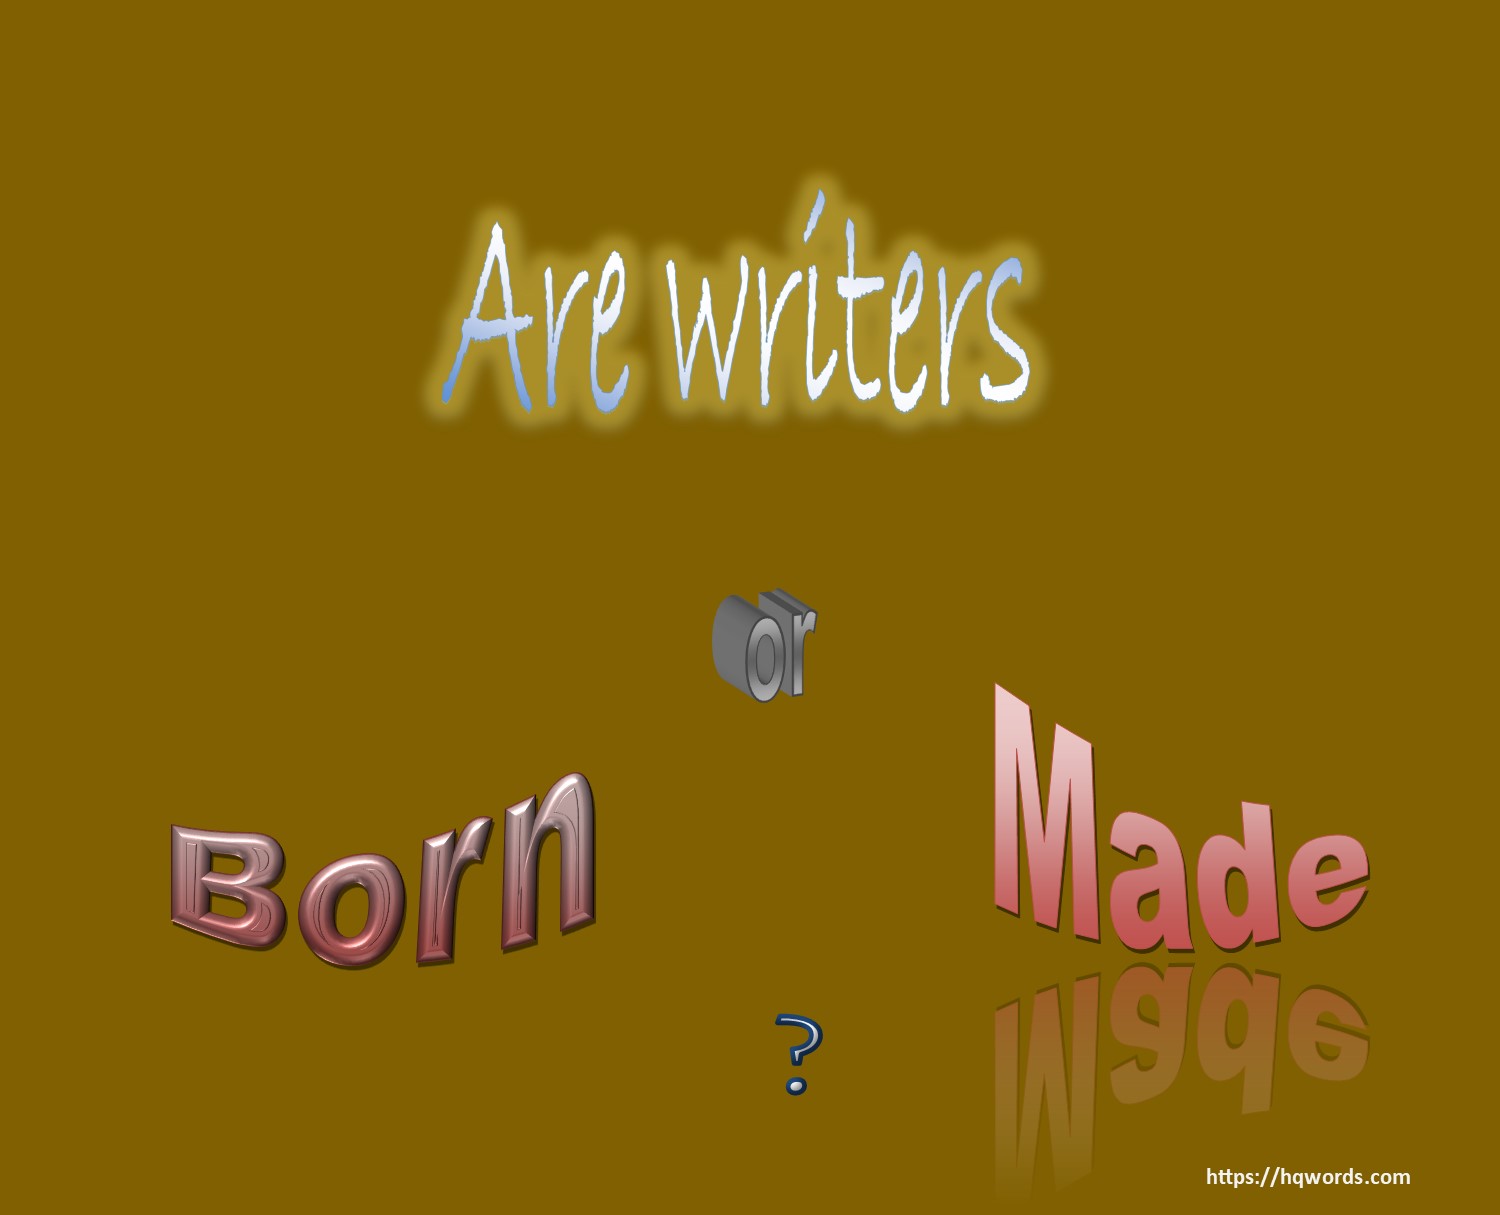 Are writers born or made